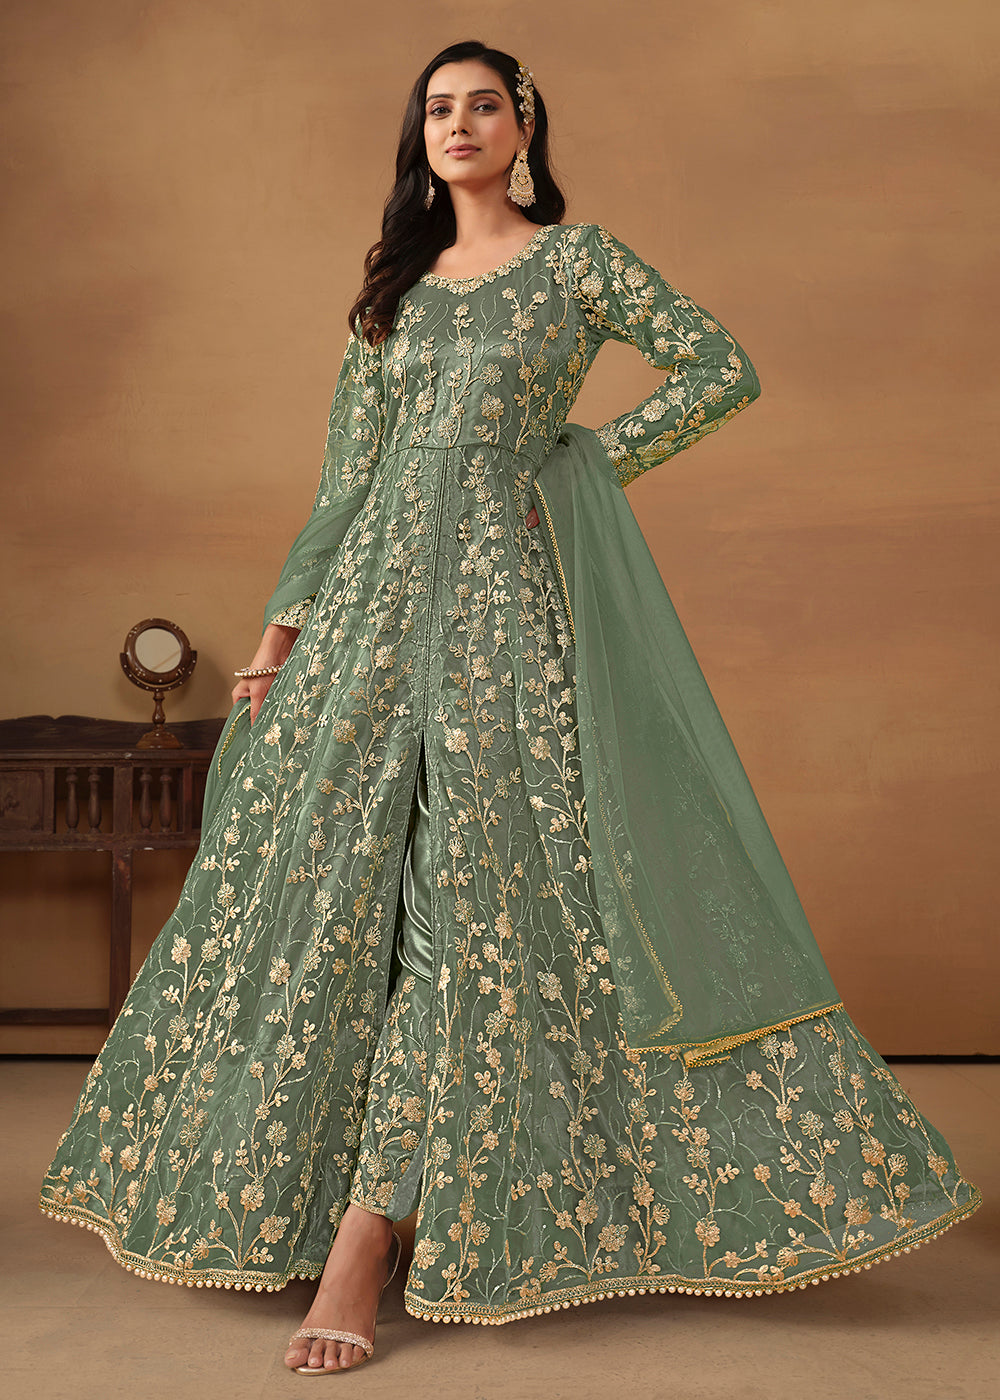 Buy Now Pant Style Sage Green Embroidered Net Wedding Anarkali Suit Online in USA, UK, Australia, New Zealand, Canada & Worldwide at Empress Clothing.